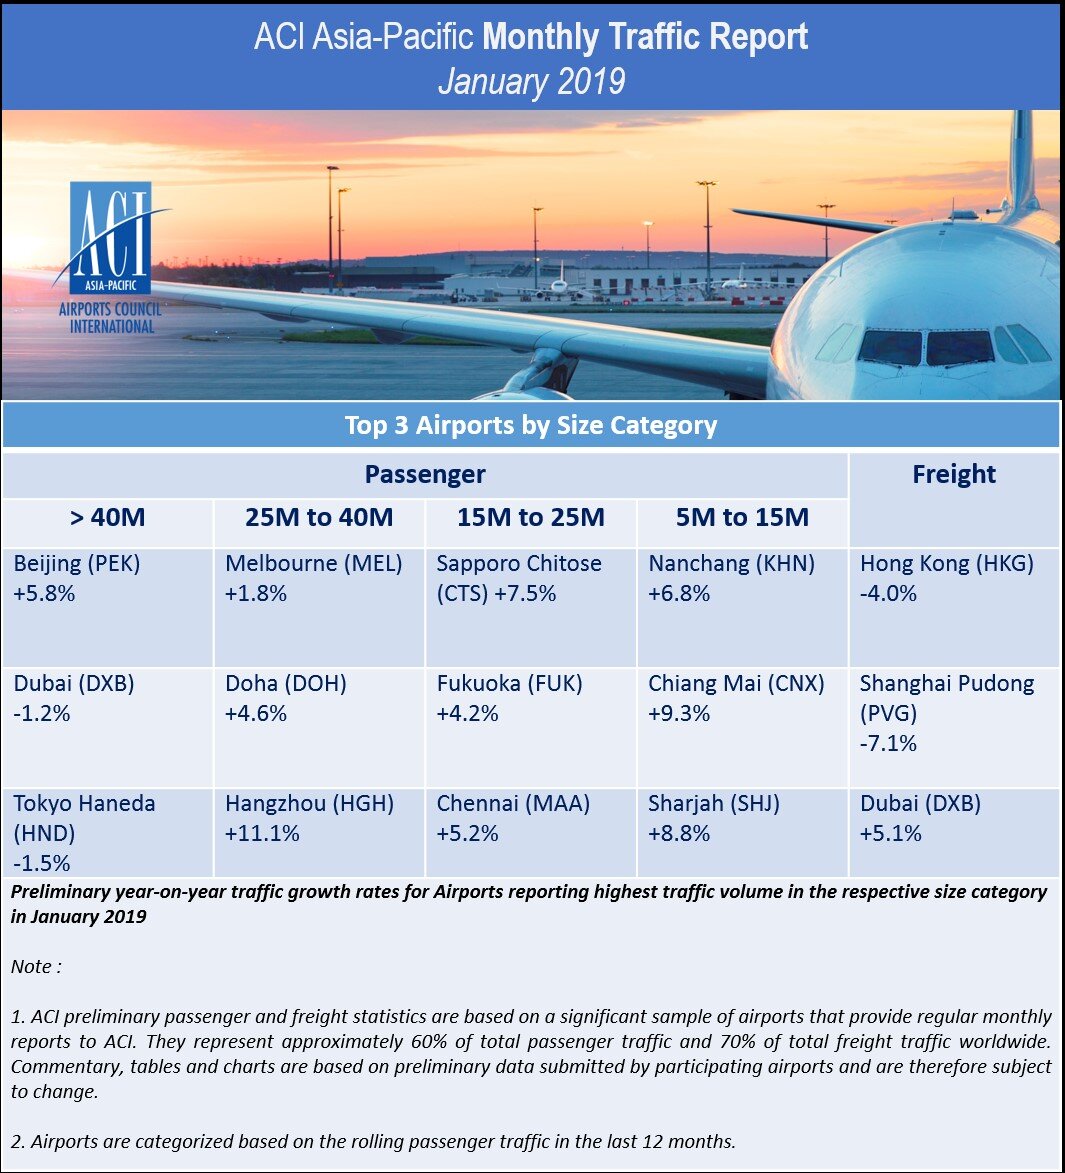 January 2019: Passengers up 5.6% in Asia-Pacific and 1.7% in Middle East